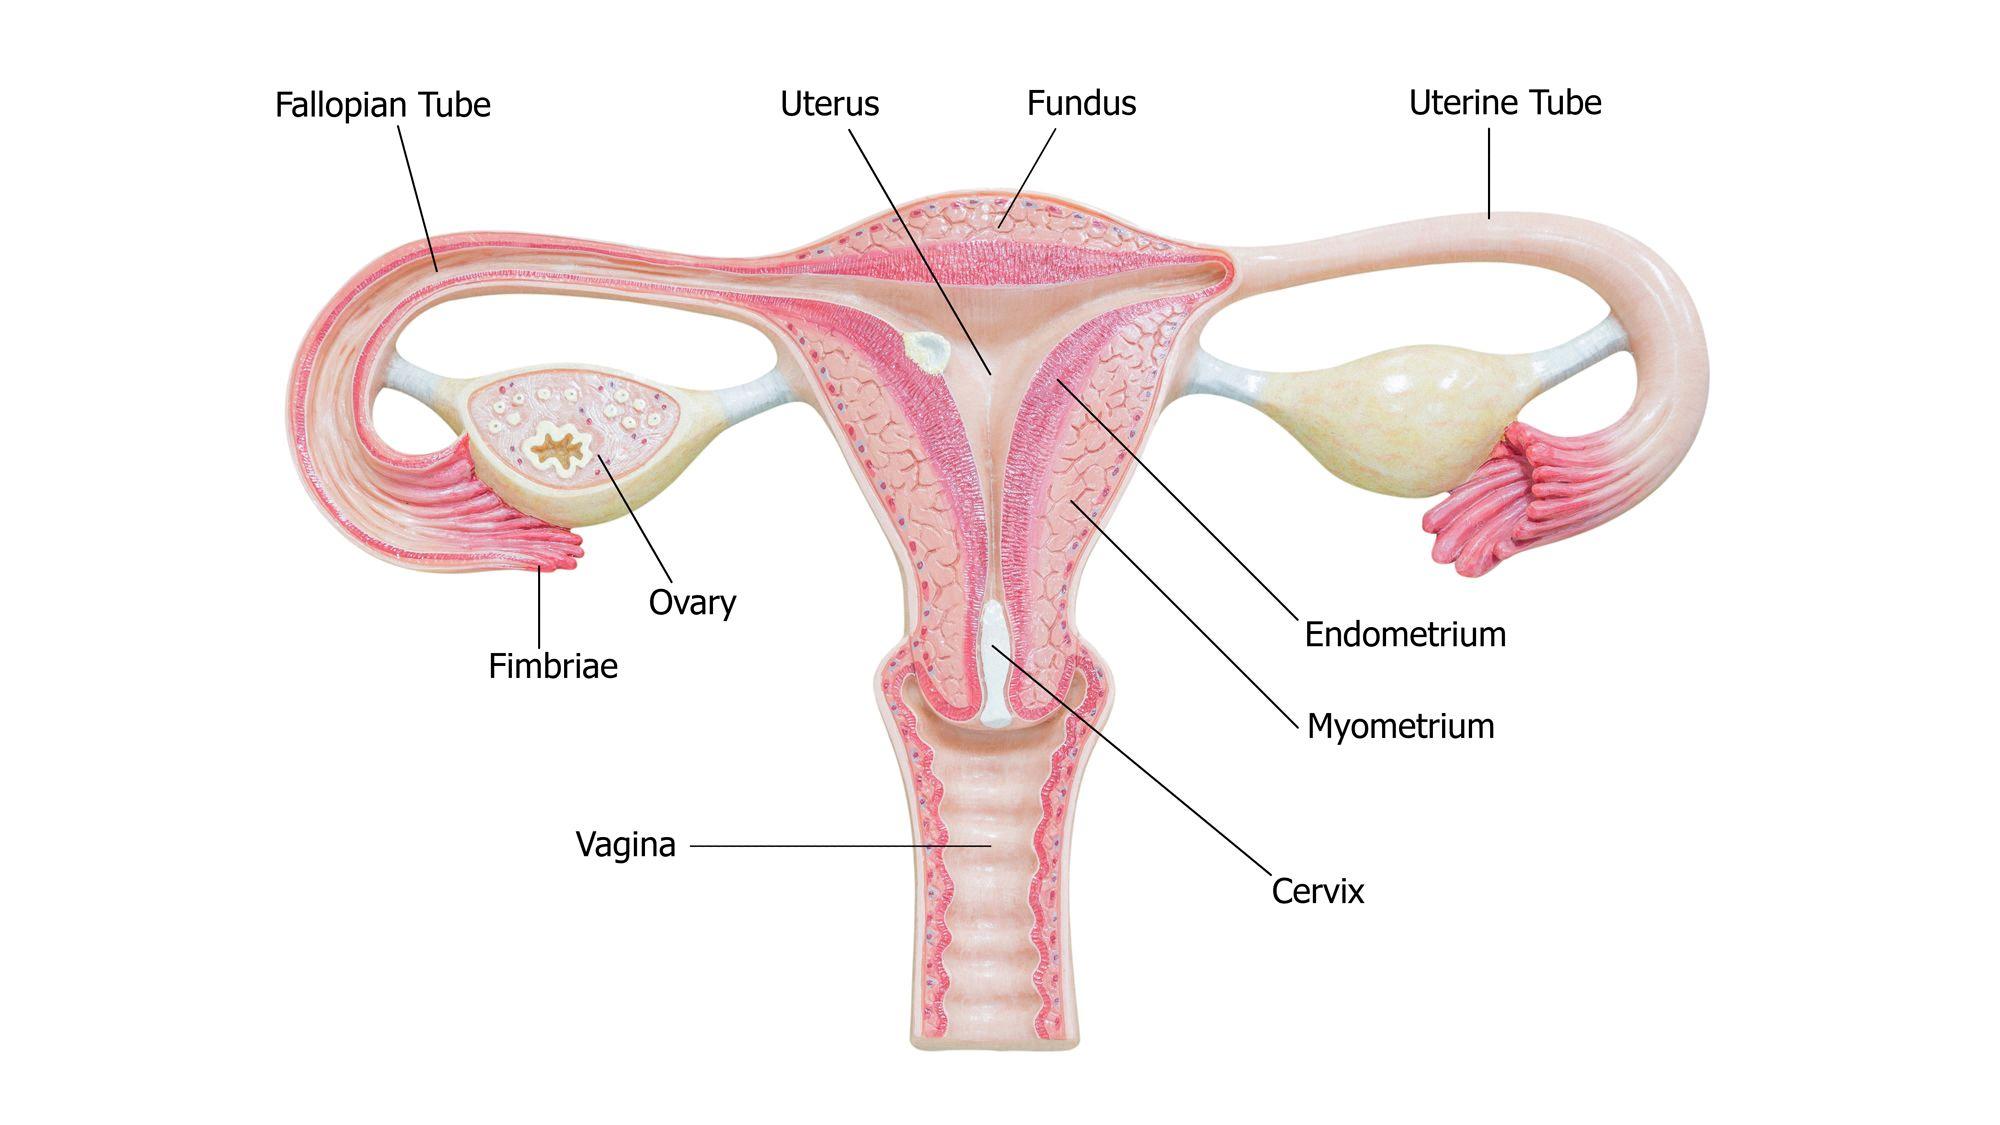 can fallopian tubes grow back after removal